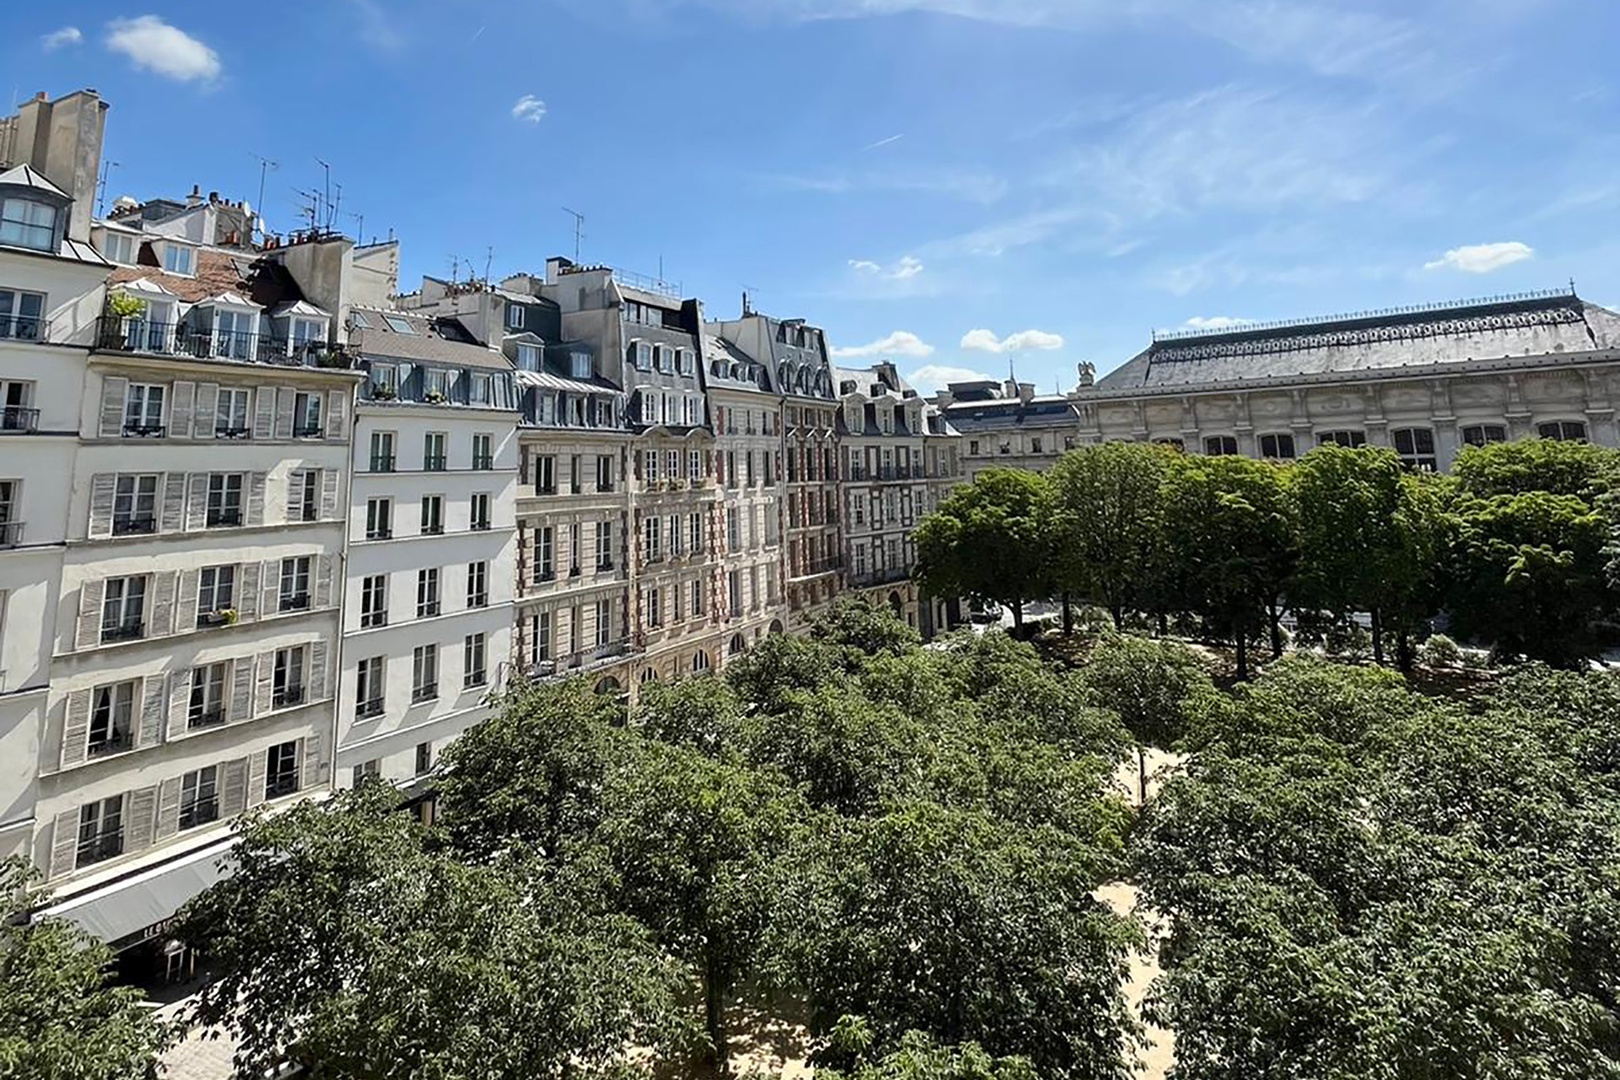 Enjoy a picturesque view of pretty Place Dauphine.